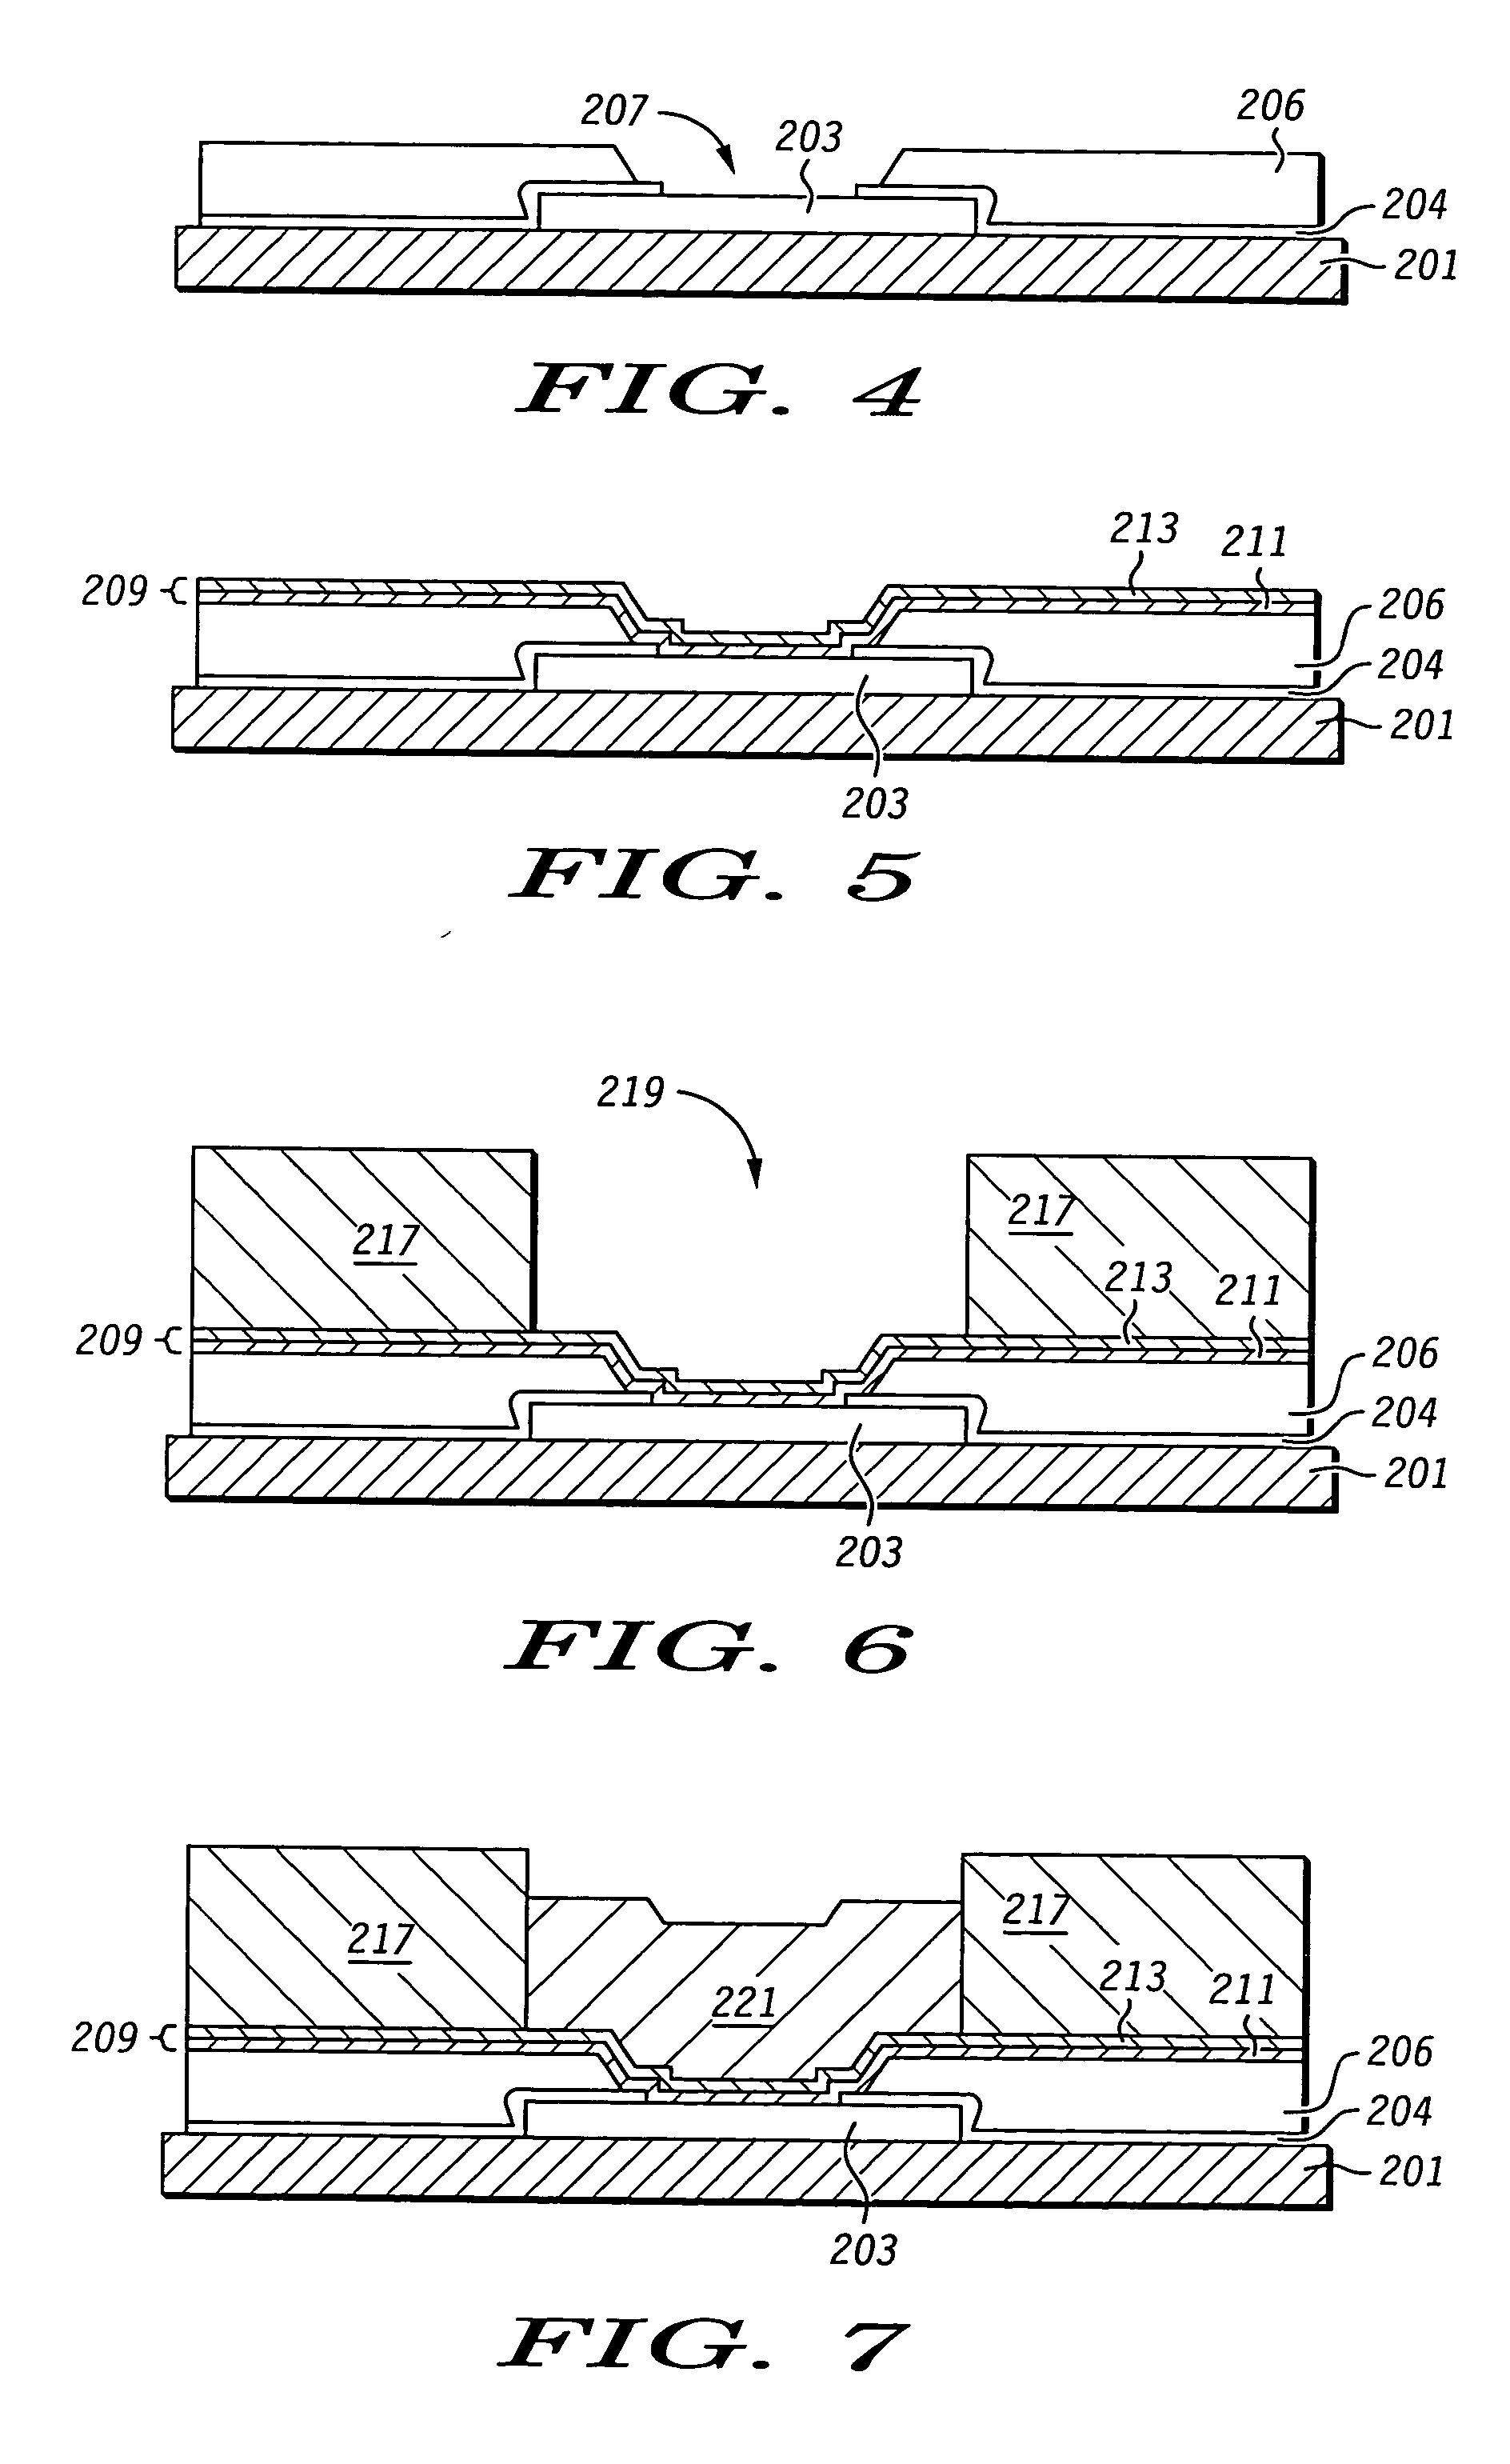 Semiconductor device with strain relieving bump design